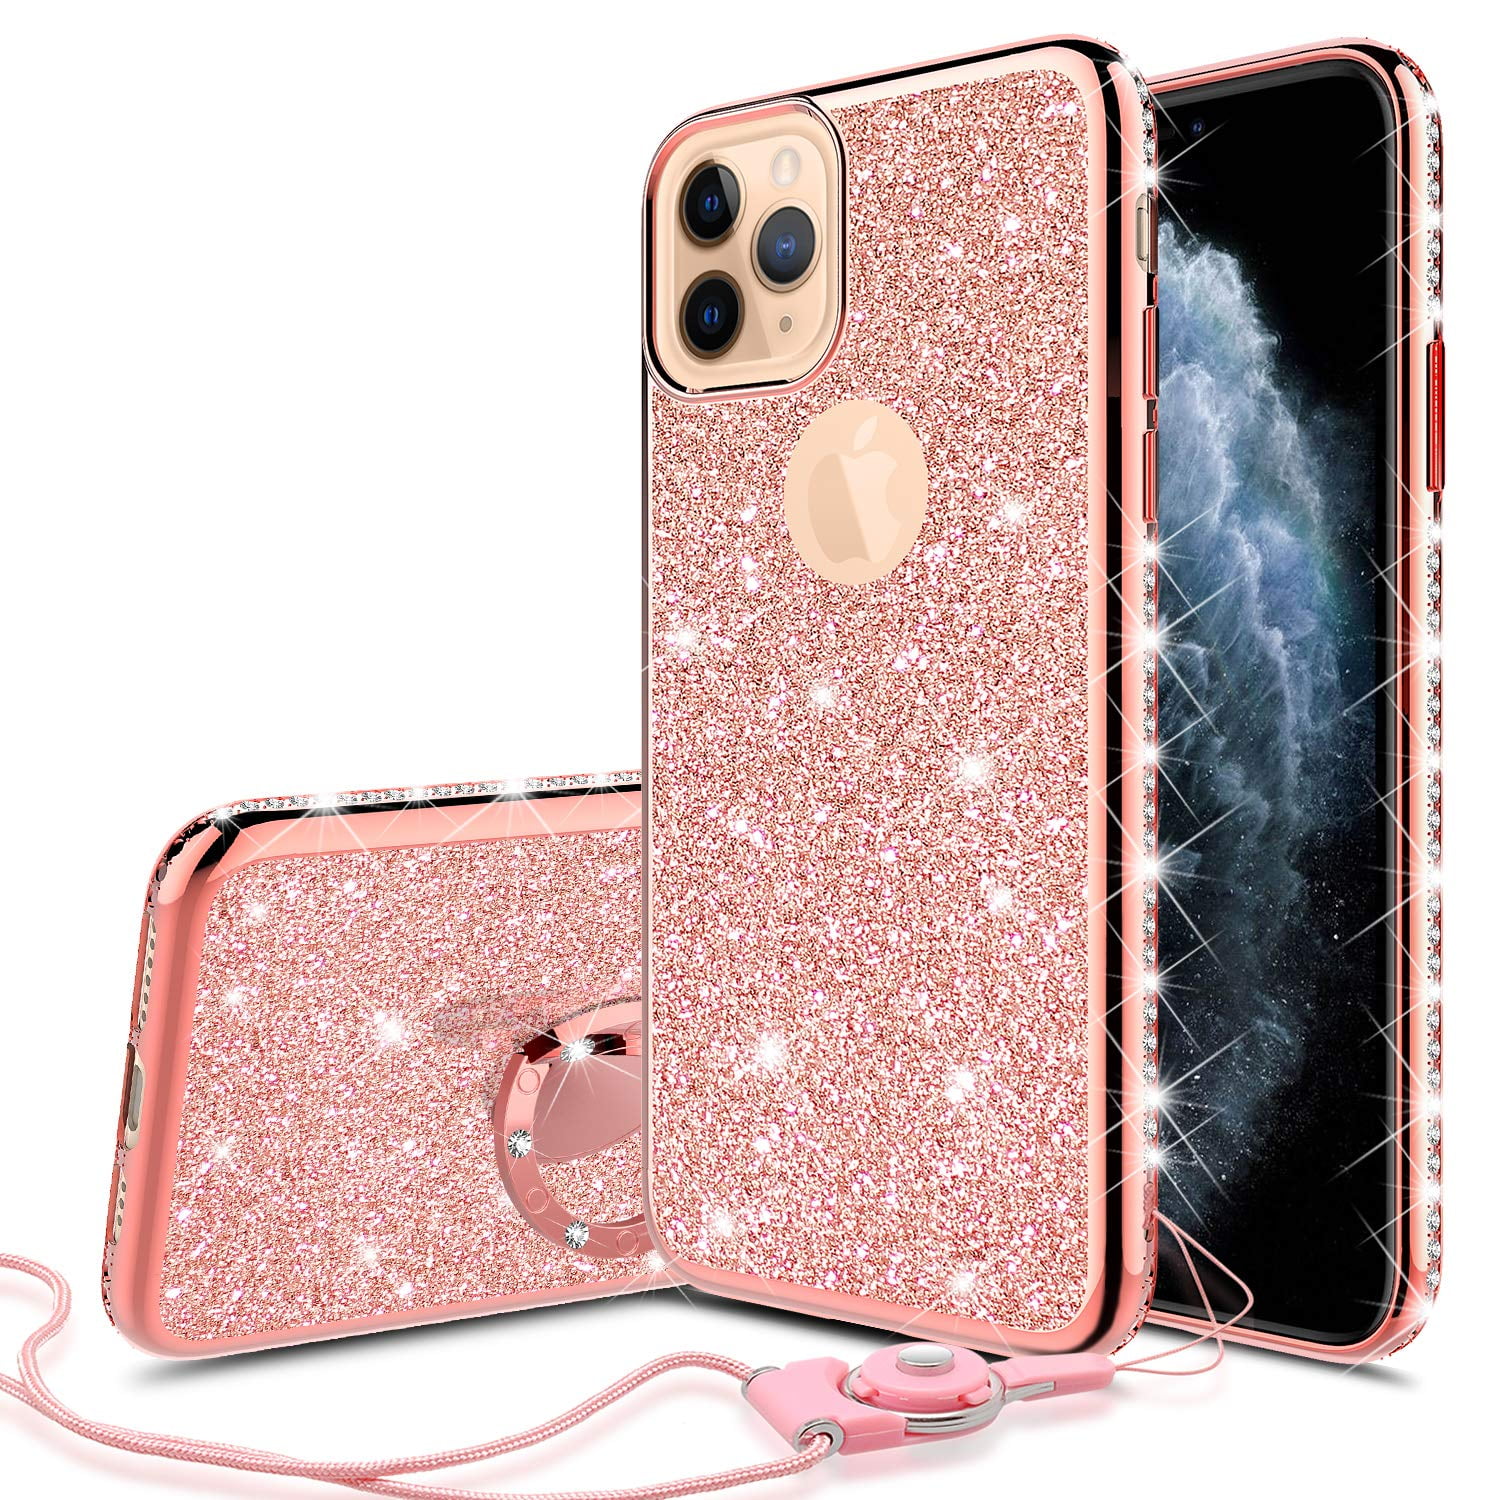 Apple Iphone 11 Pro Max Case For Girl Women Glitter Cute Girly